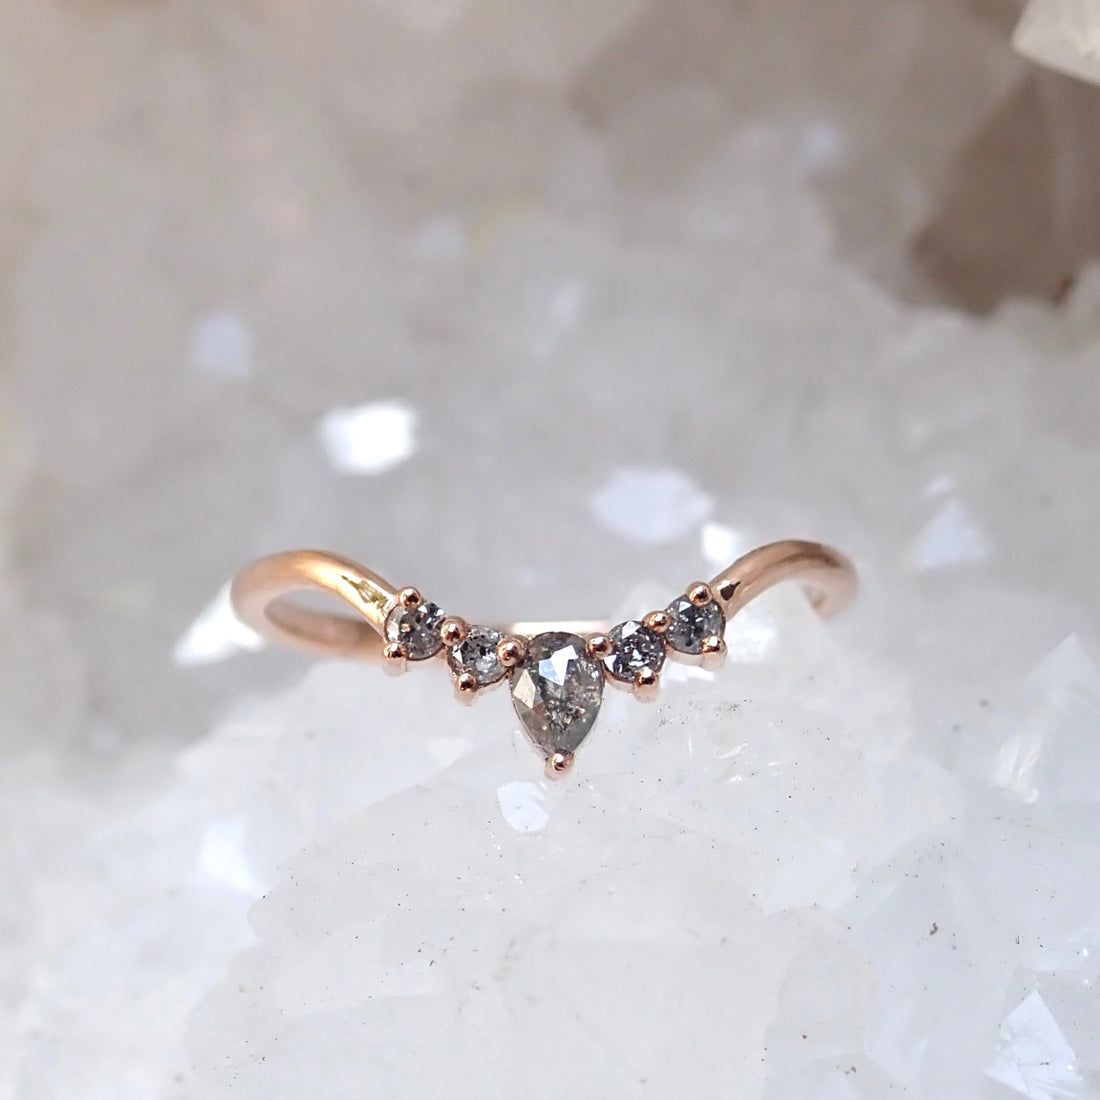 Inverted Pear Contour Ring - Salt and Pepper Diamond Ring- mossNstone